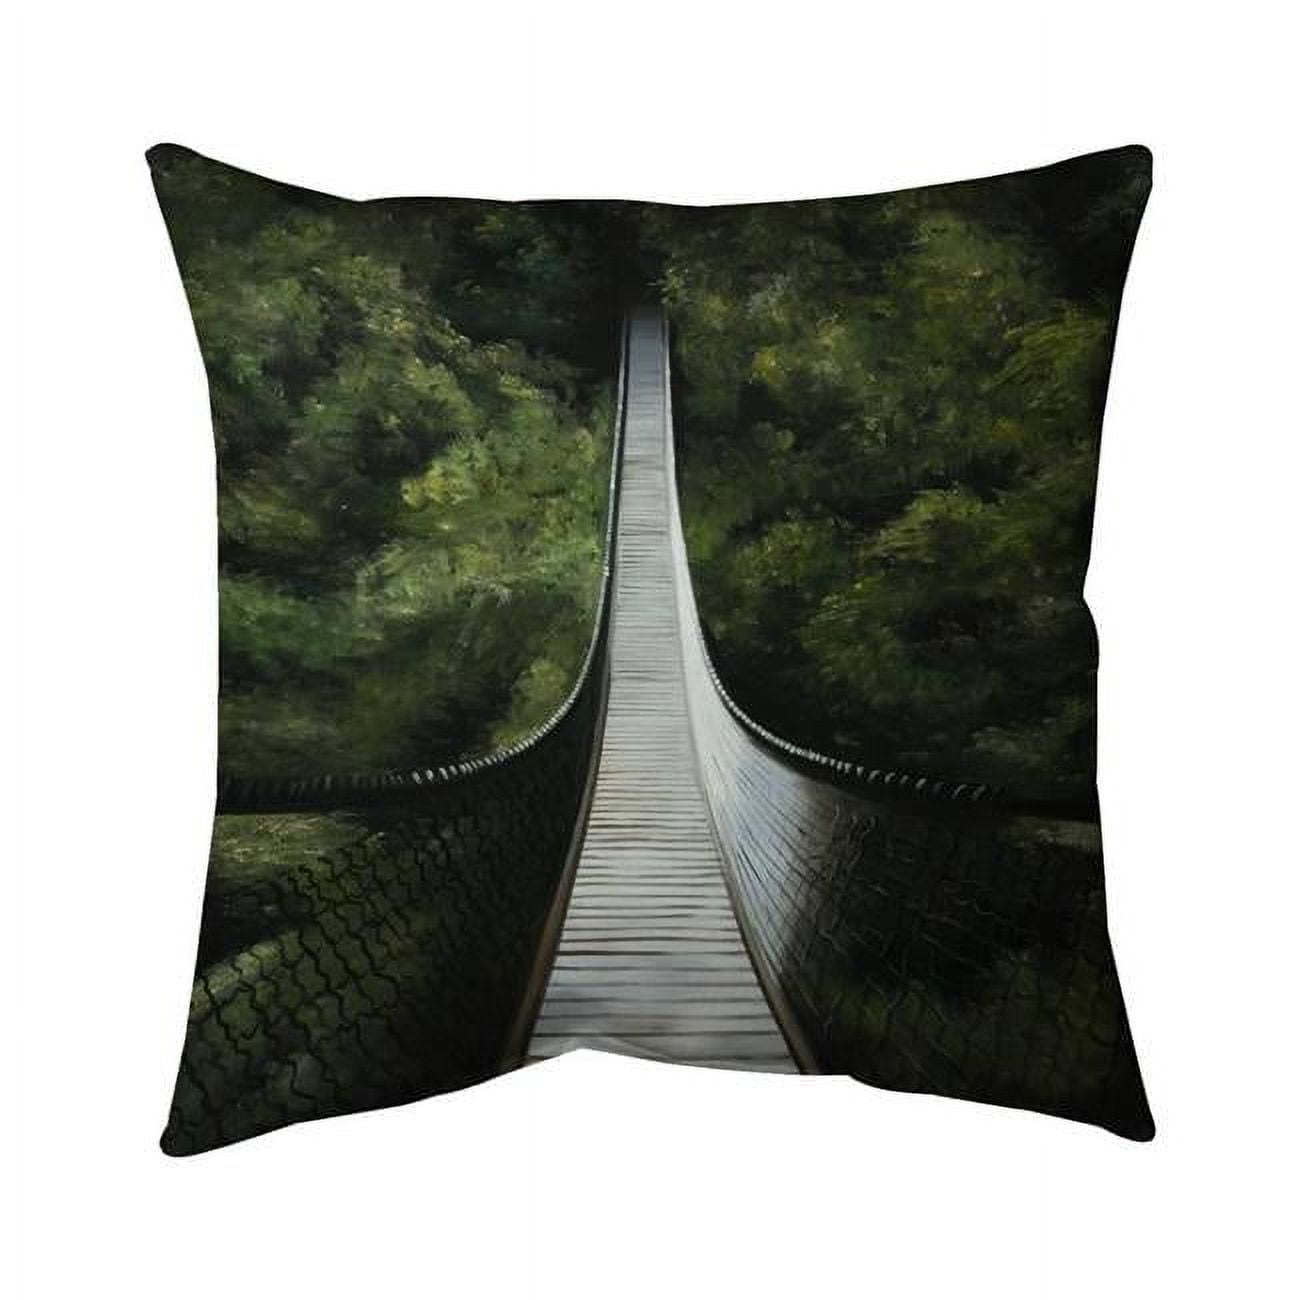 Begin Home Decor 5542-1818-LA145 18 x 18 in. Suspended Bridge in the Forest-Double Sided Print Outdoor Pillow Cover